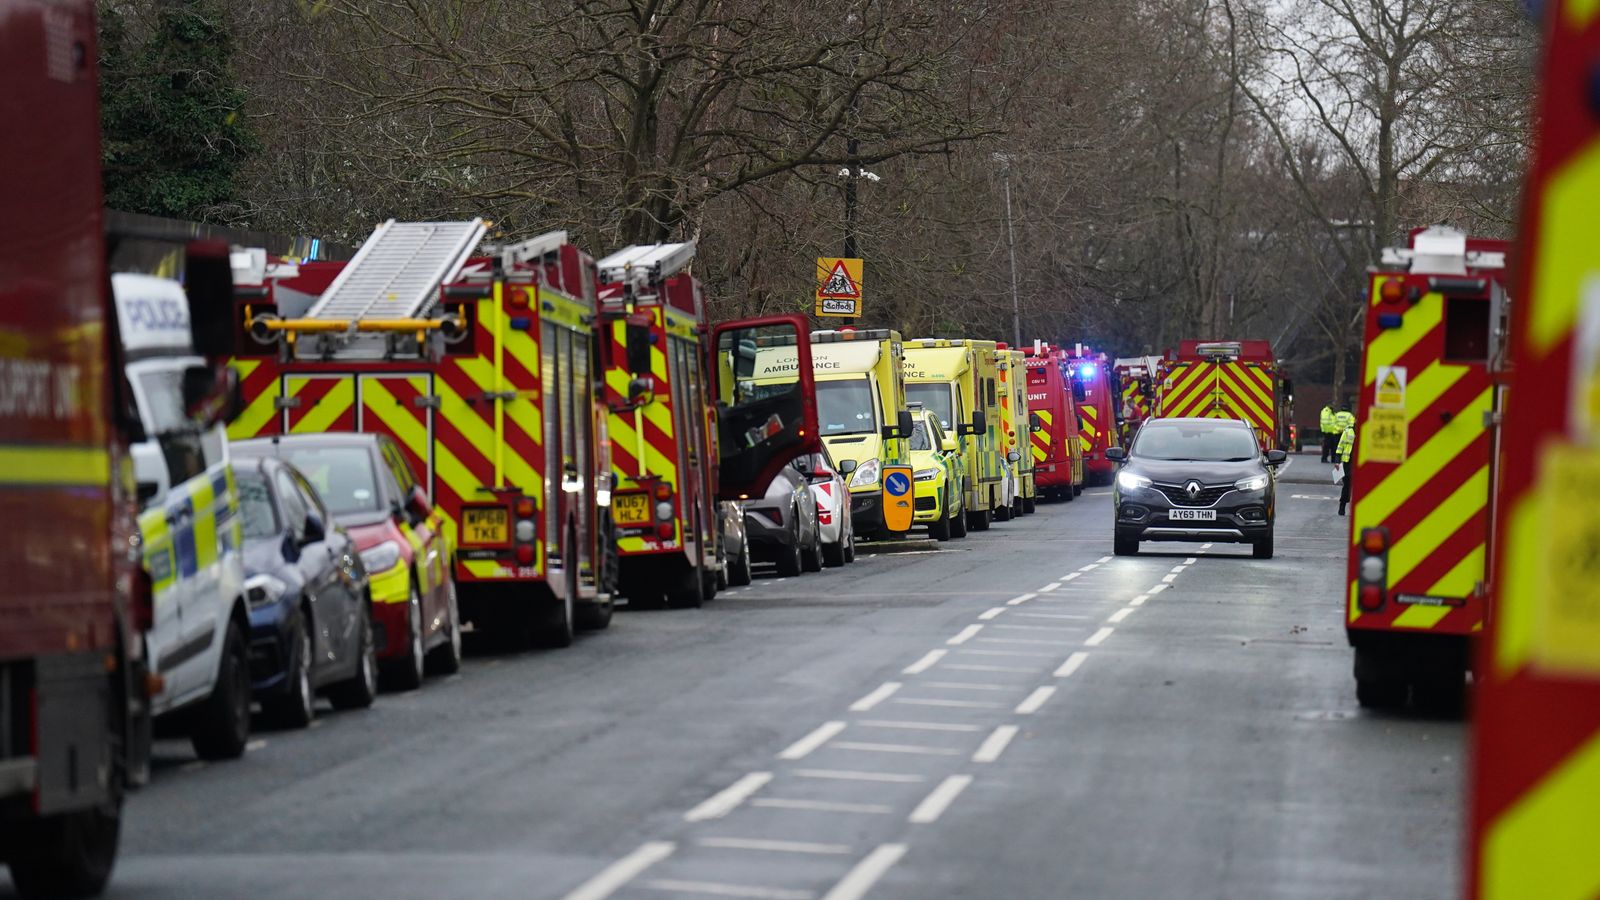 Ten fire engines and 70 firefighters tackle suspected arson attack at ...